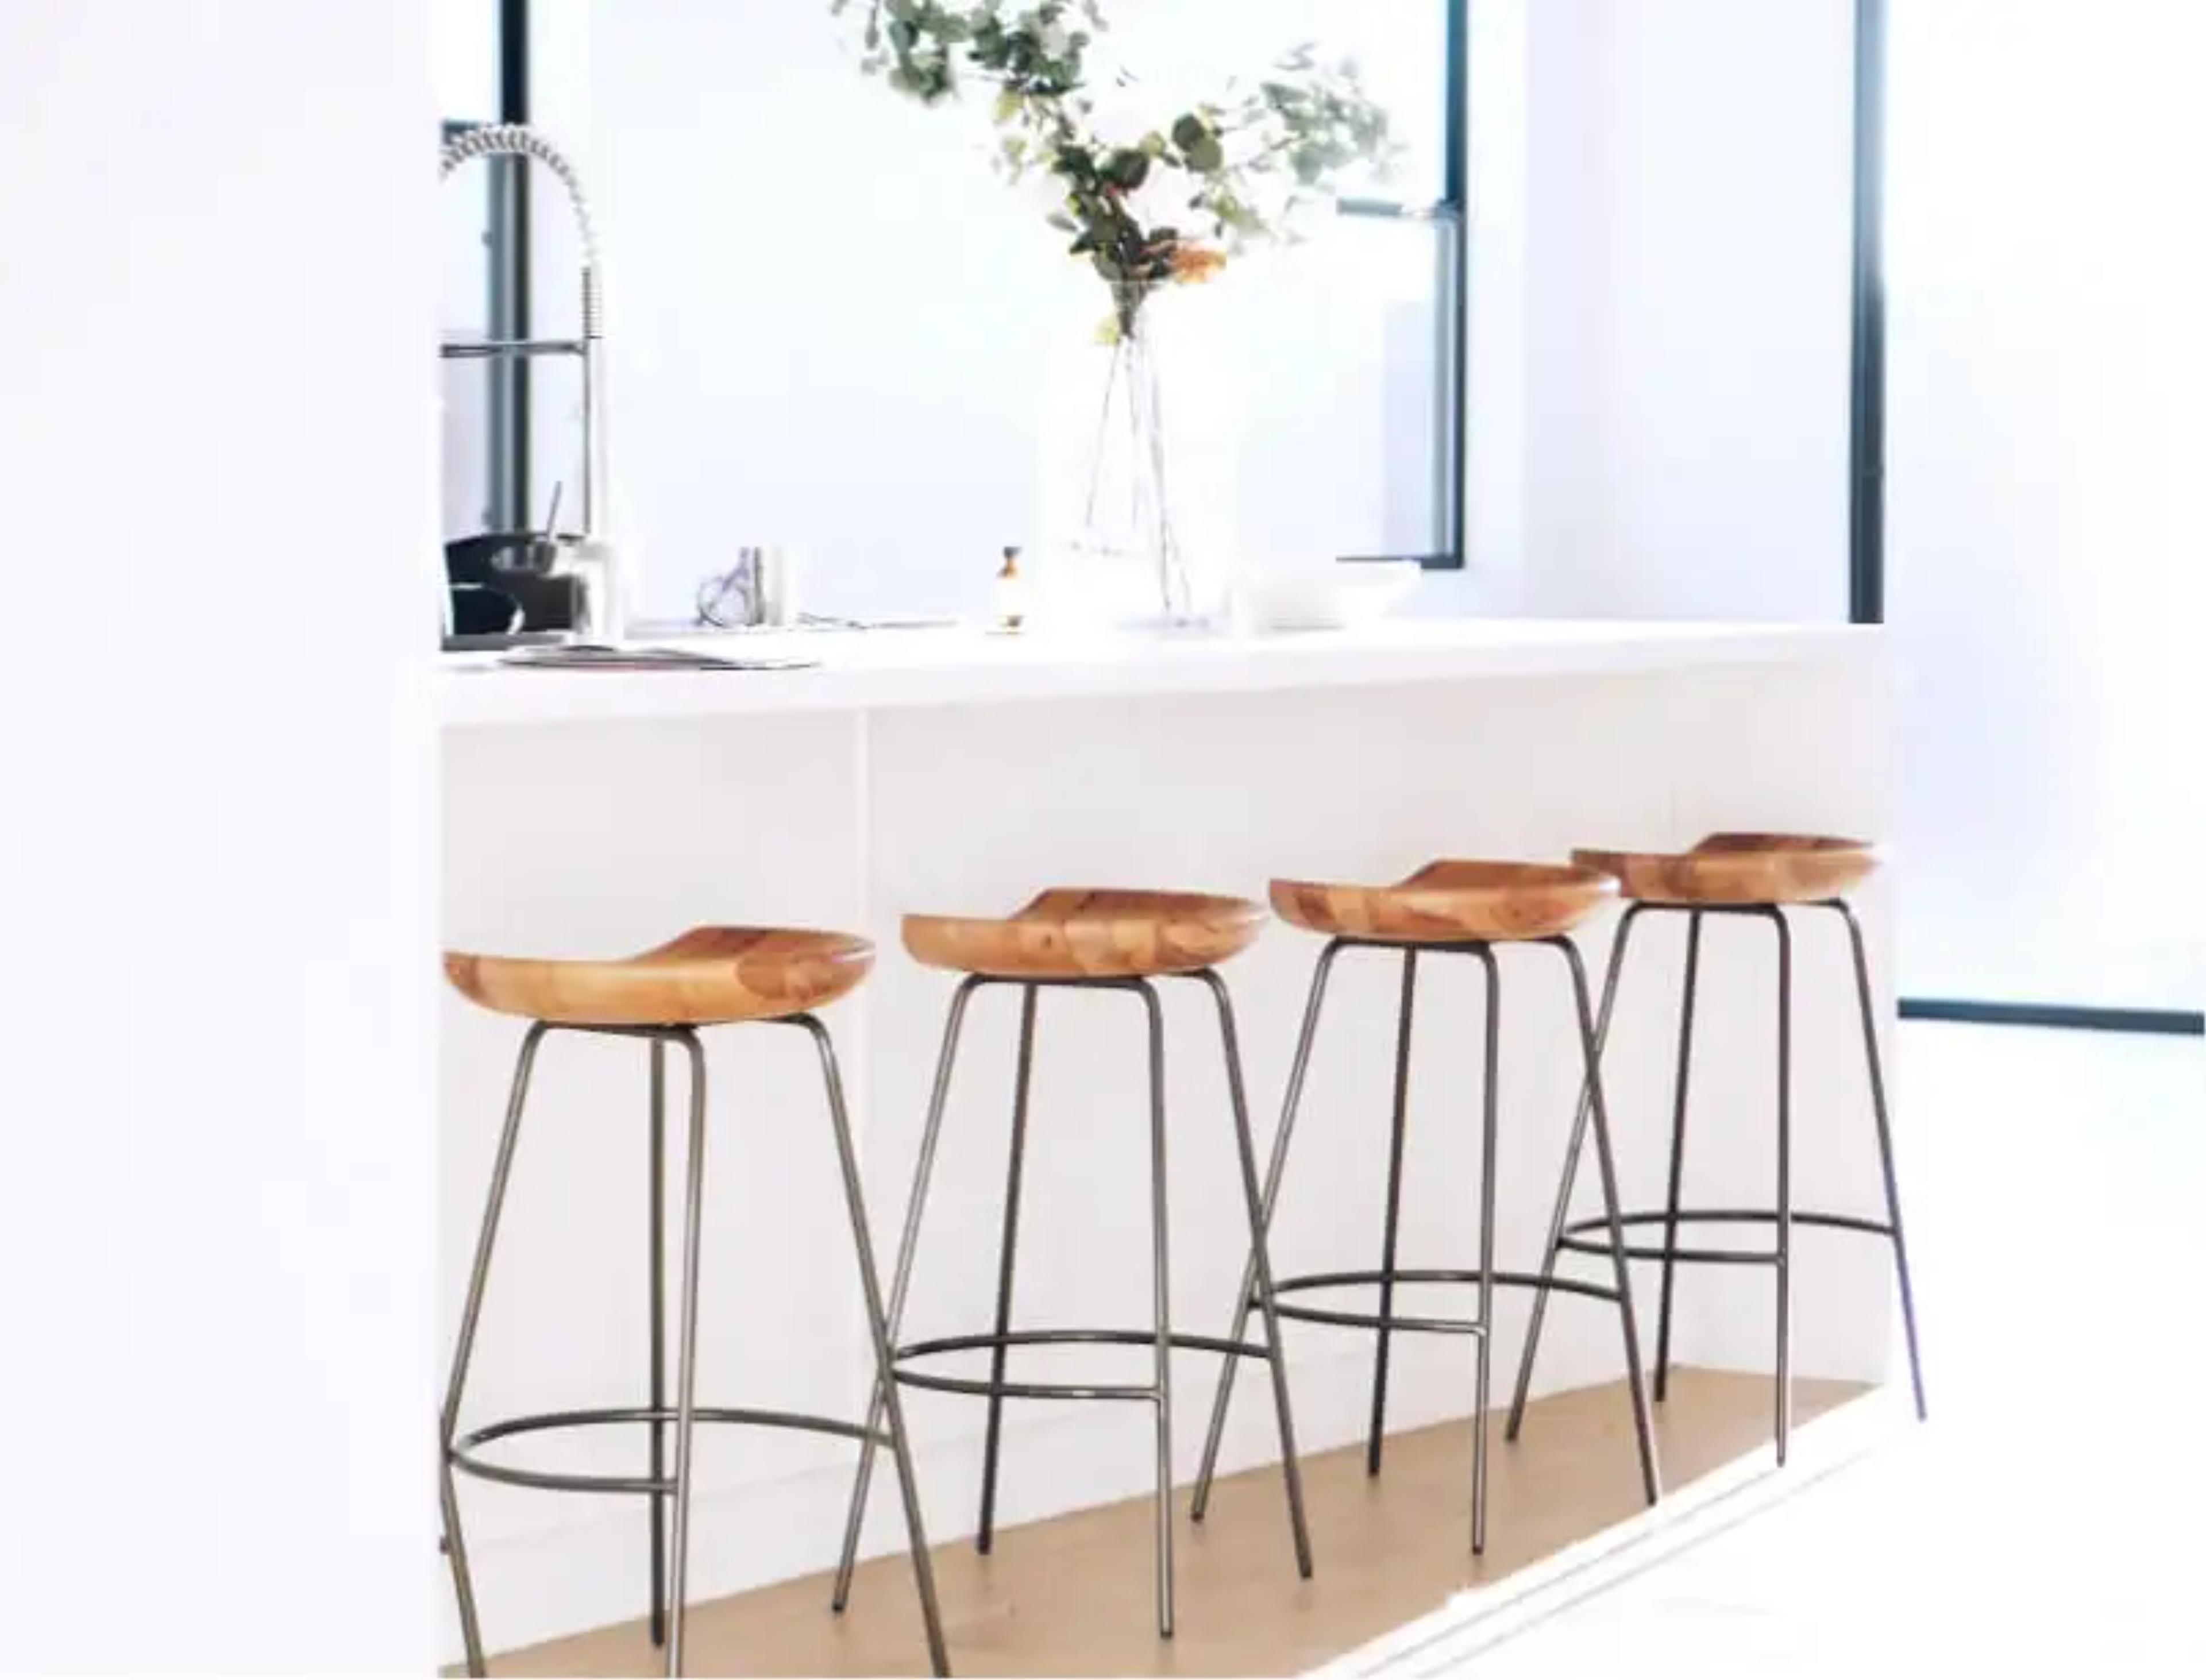 Kitchen bench with stools